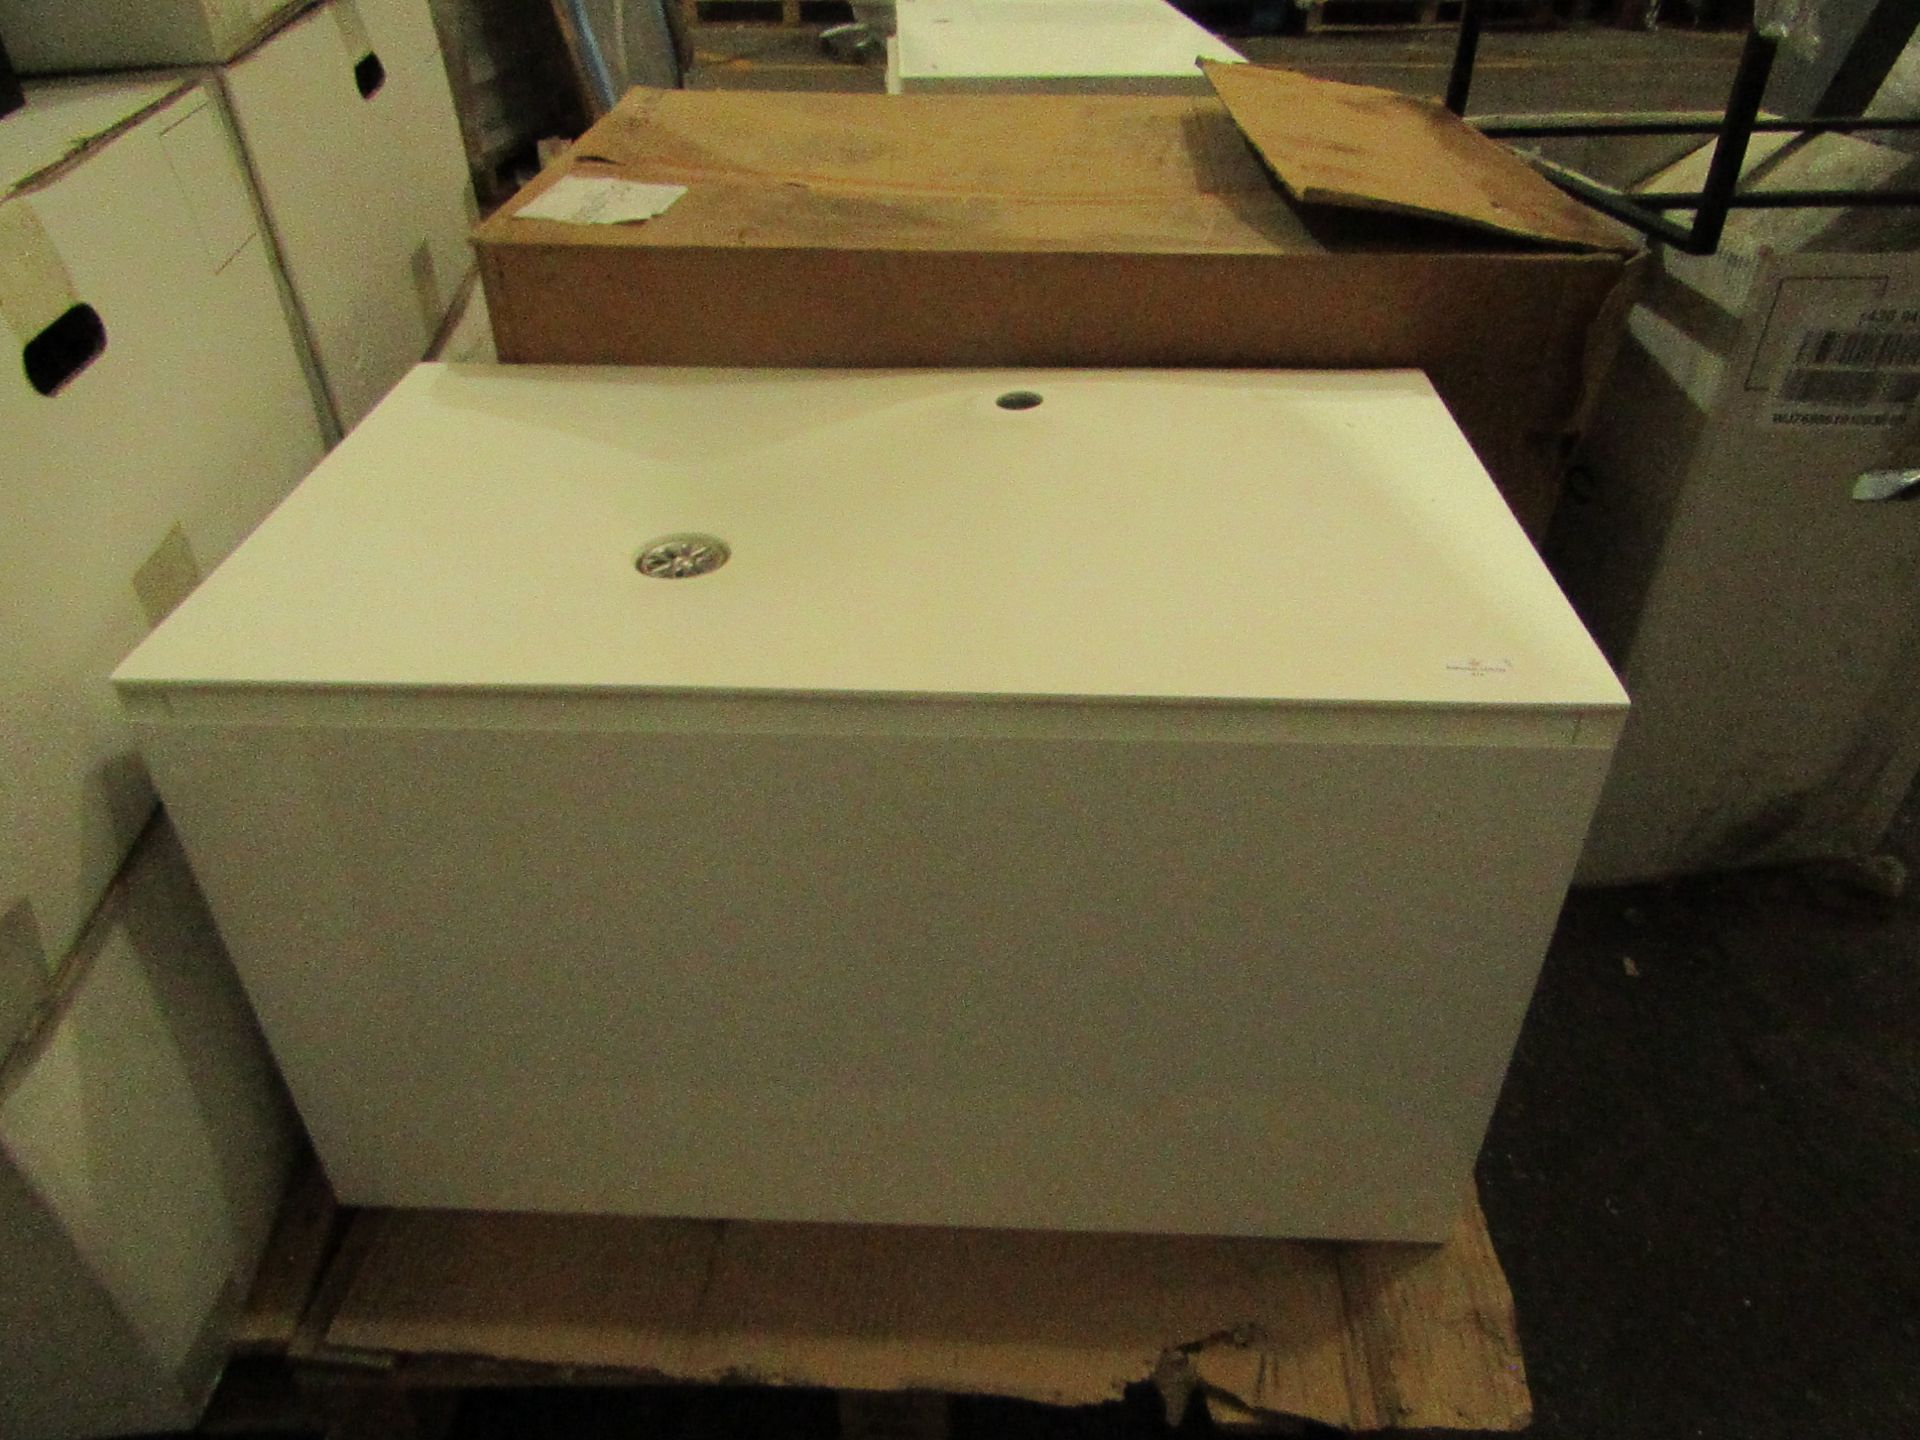 Cosmic Flow 800 wall mounted Single drawer unit with matching sink, unused but the unit does have